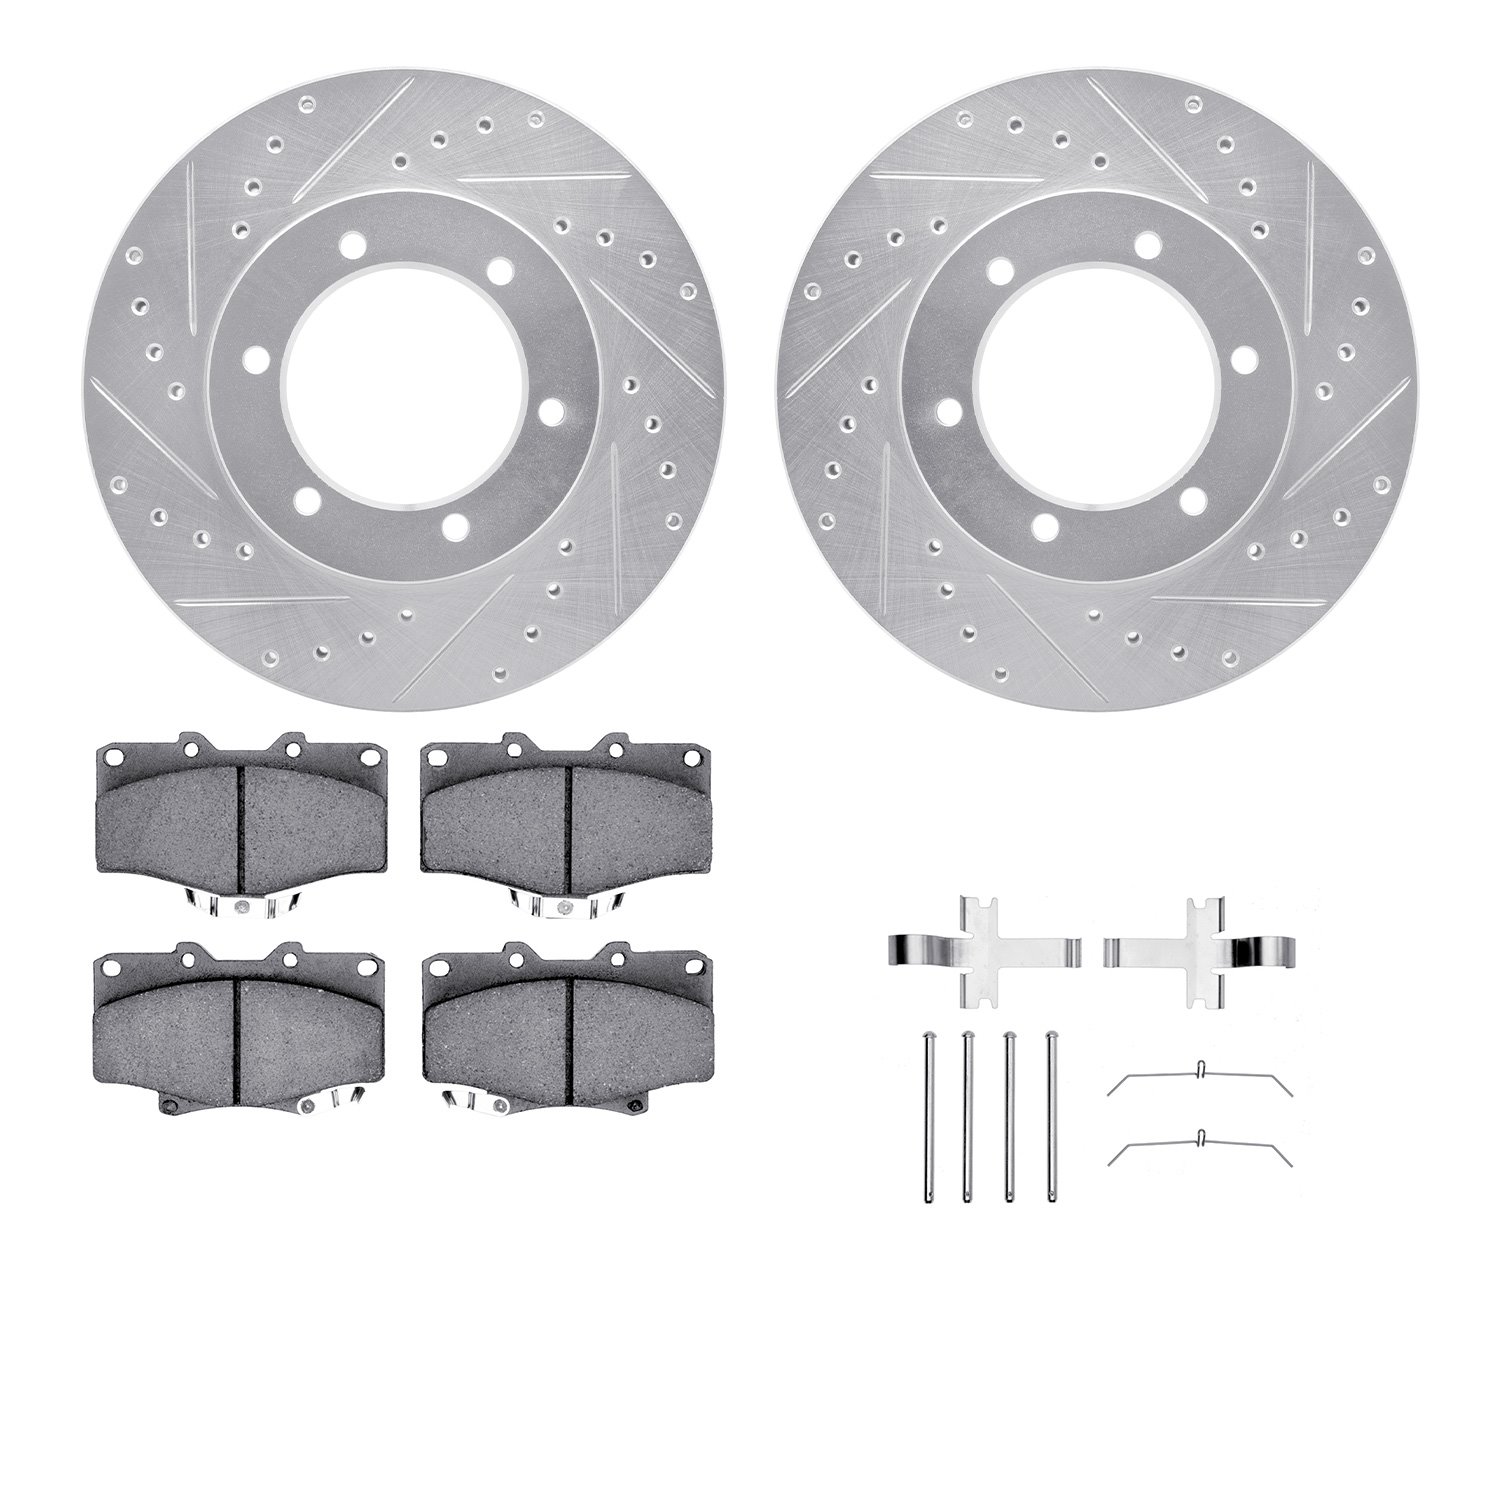 7412-76008 Drilled/Slotted Brake Rotors with Ultimate-Duty Brake Pads Kit & Hardware [Silver], 1991-1998 Lexus/Toyota/Scion, Pos